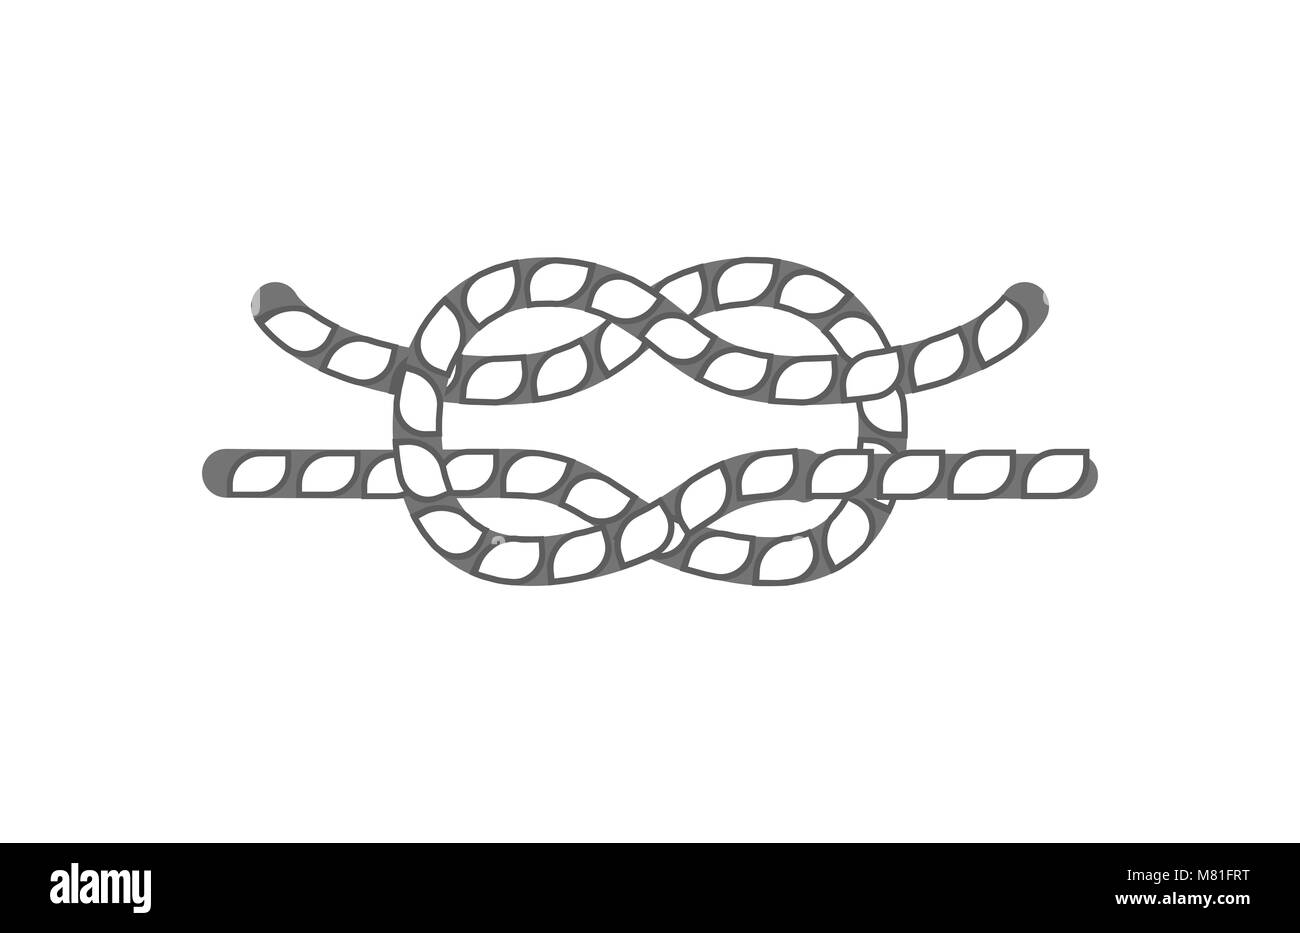 Hammock rope knot isolated vector icon Stock Vector